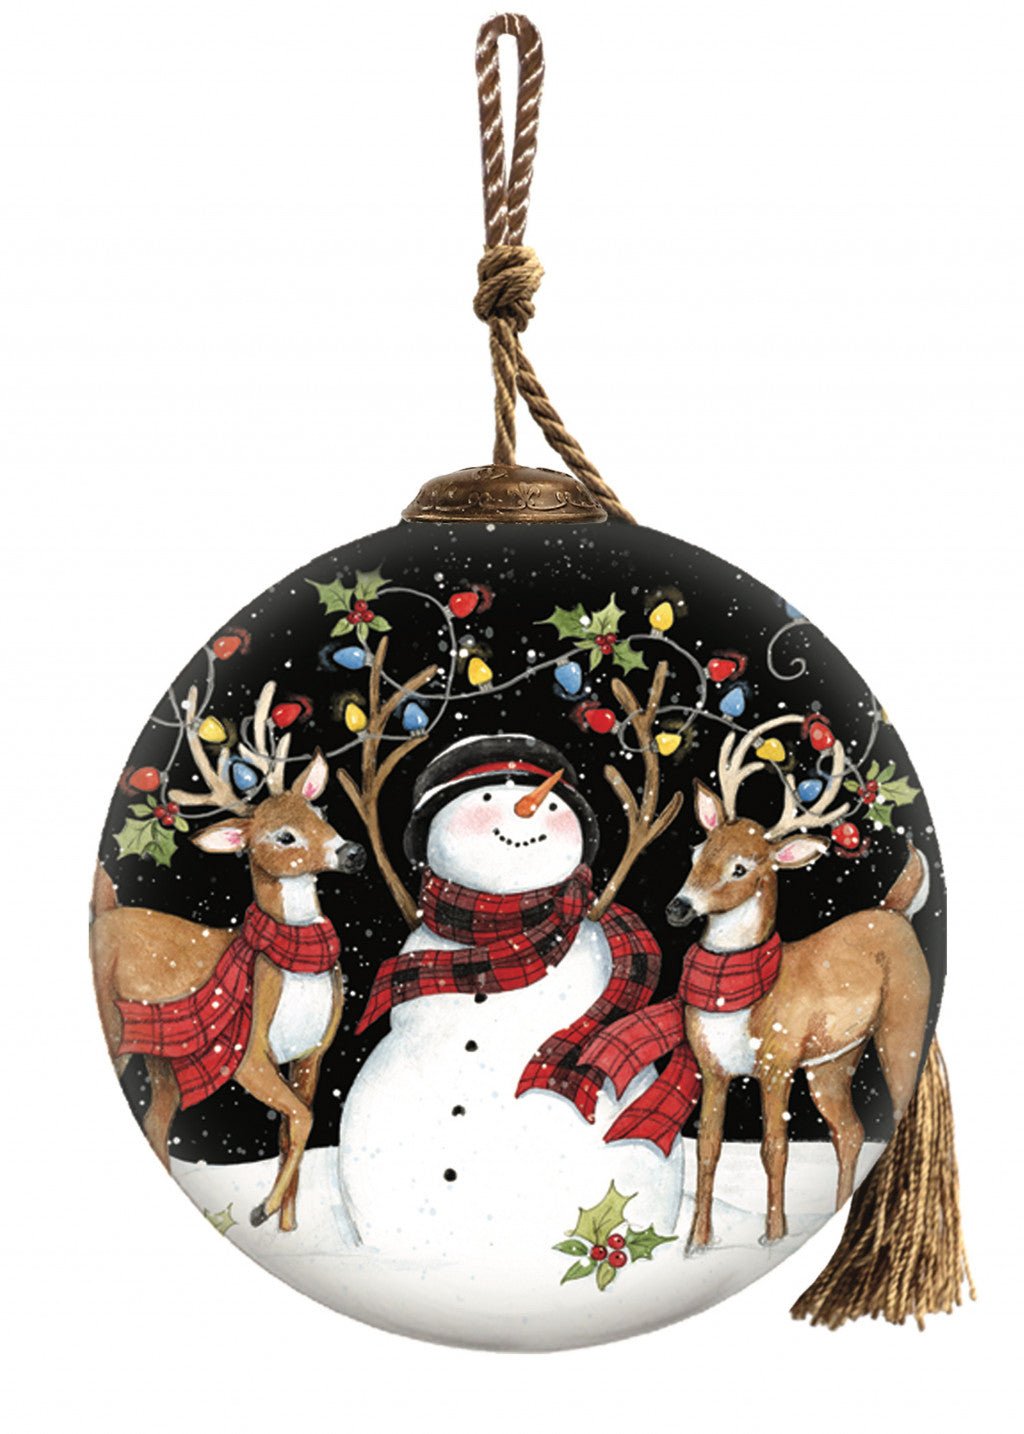 Snowman-and-Reindeer-in-Holiday-Lights-Hand-Painted-Mouth-Blown-Glass-Ornament-Christmas-Ornaments